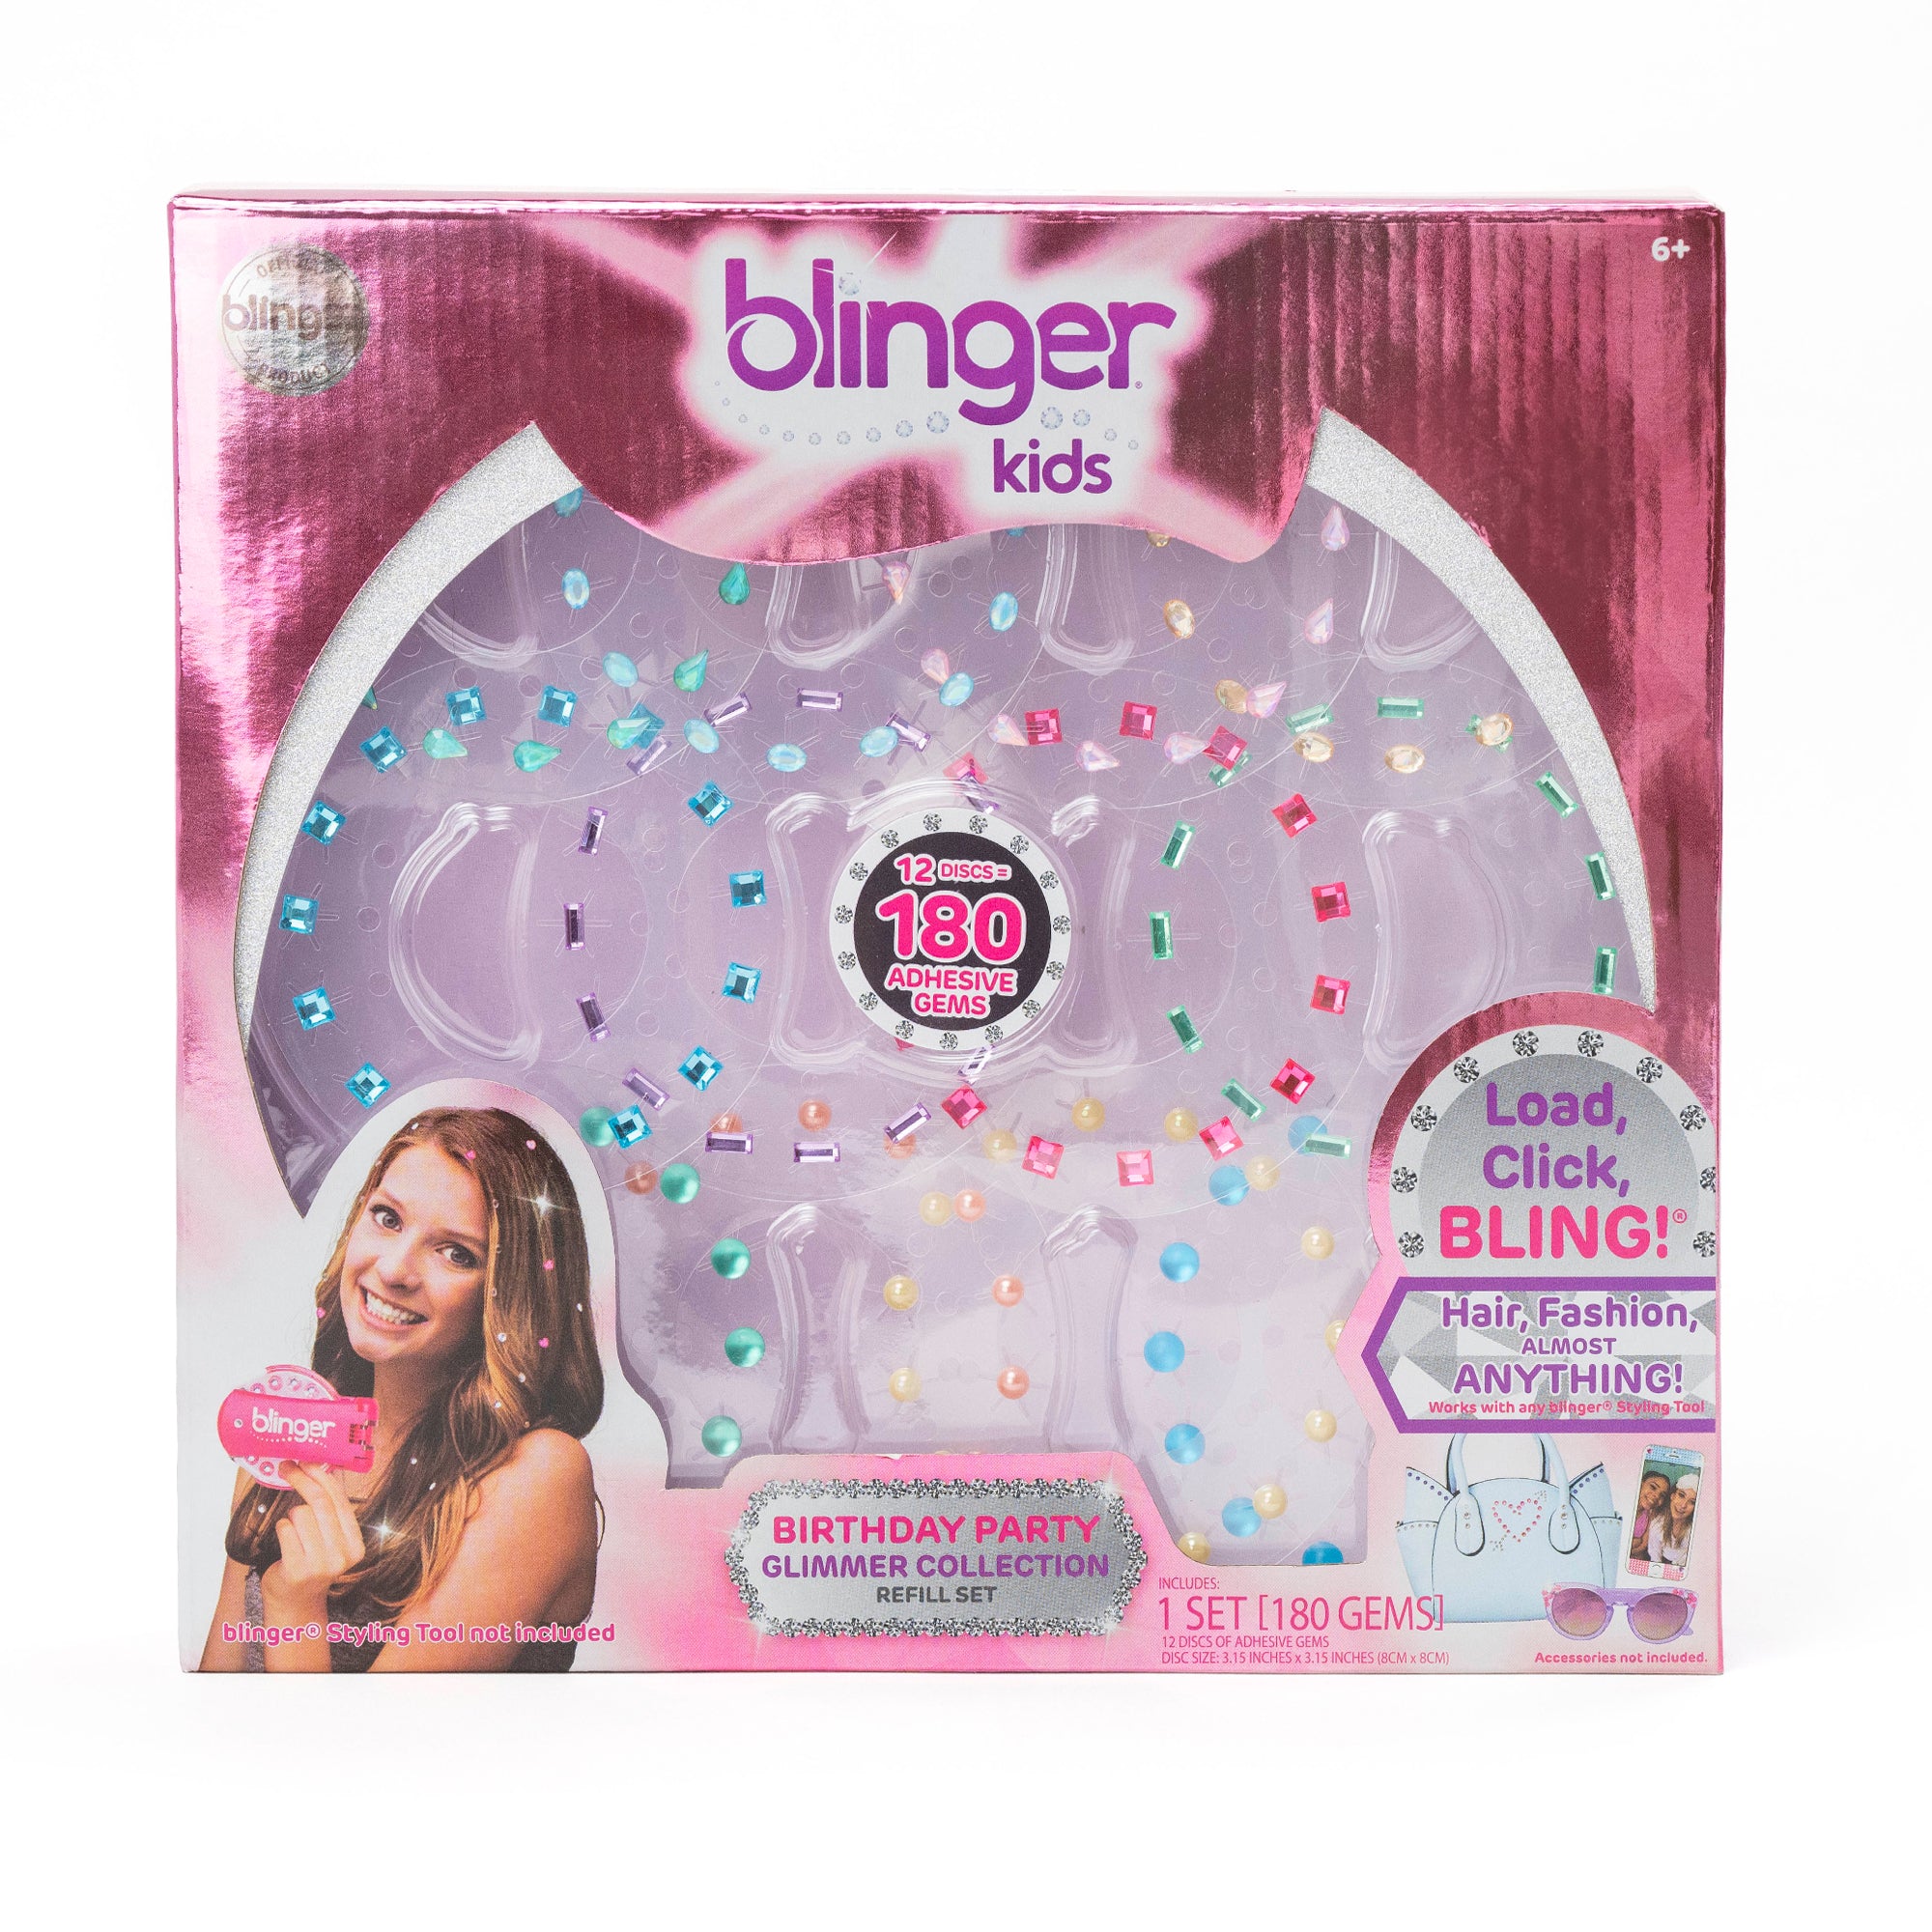 blinger® kids Glimmer Collection Refill Set with 180 Colorful Gems